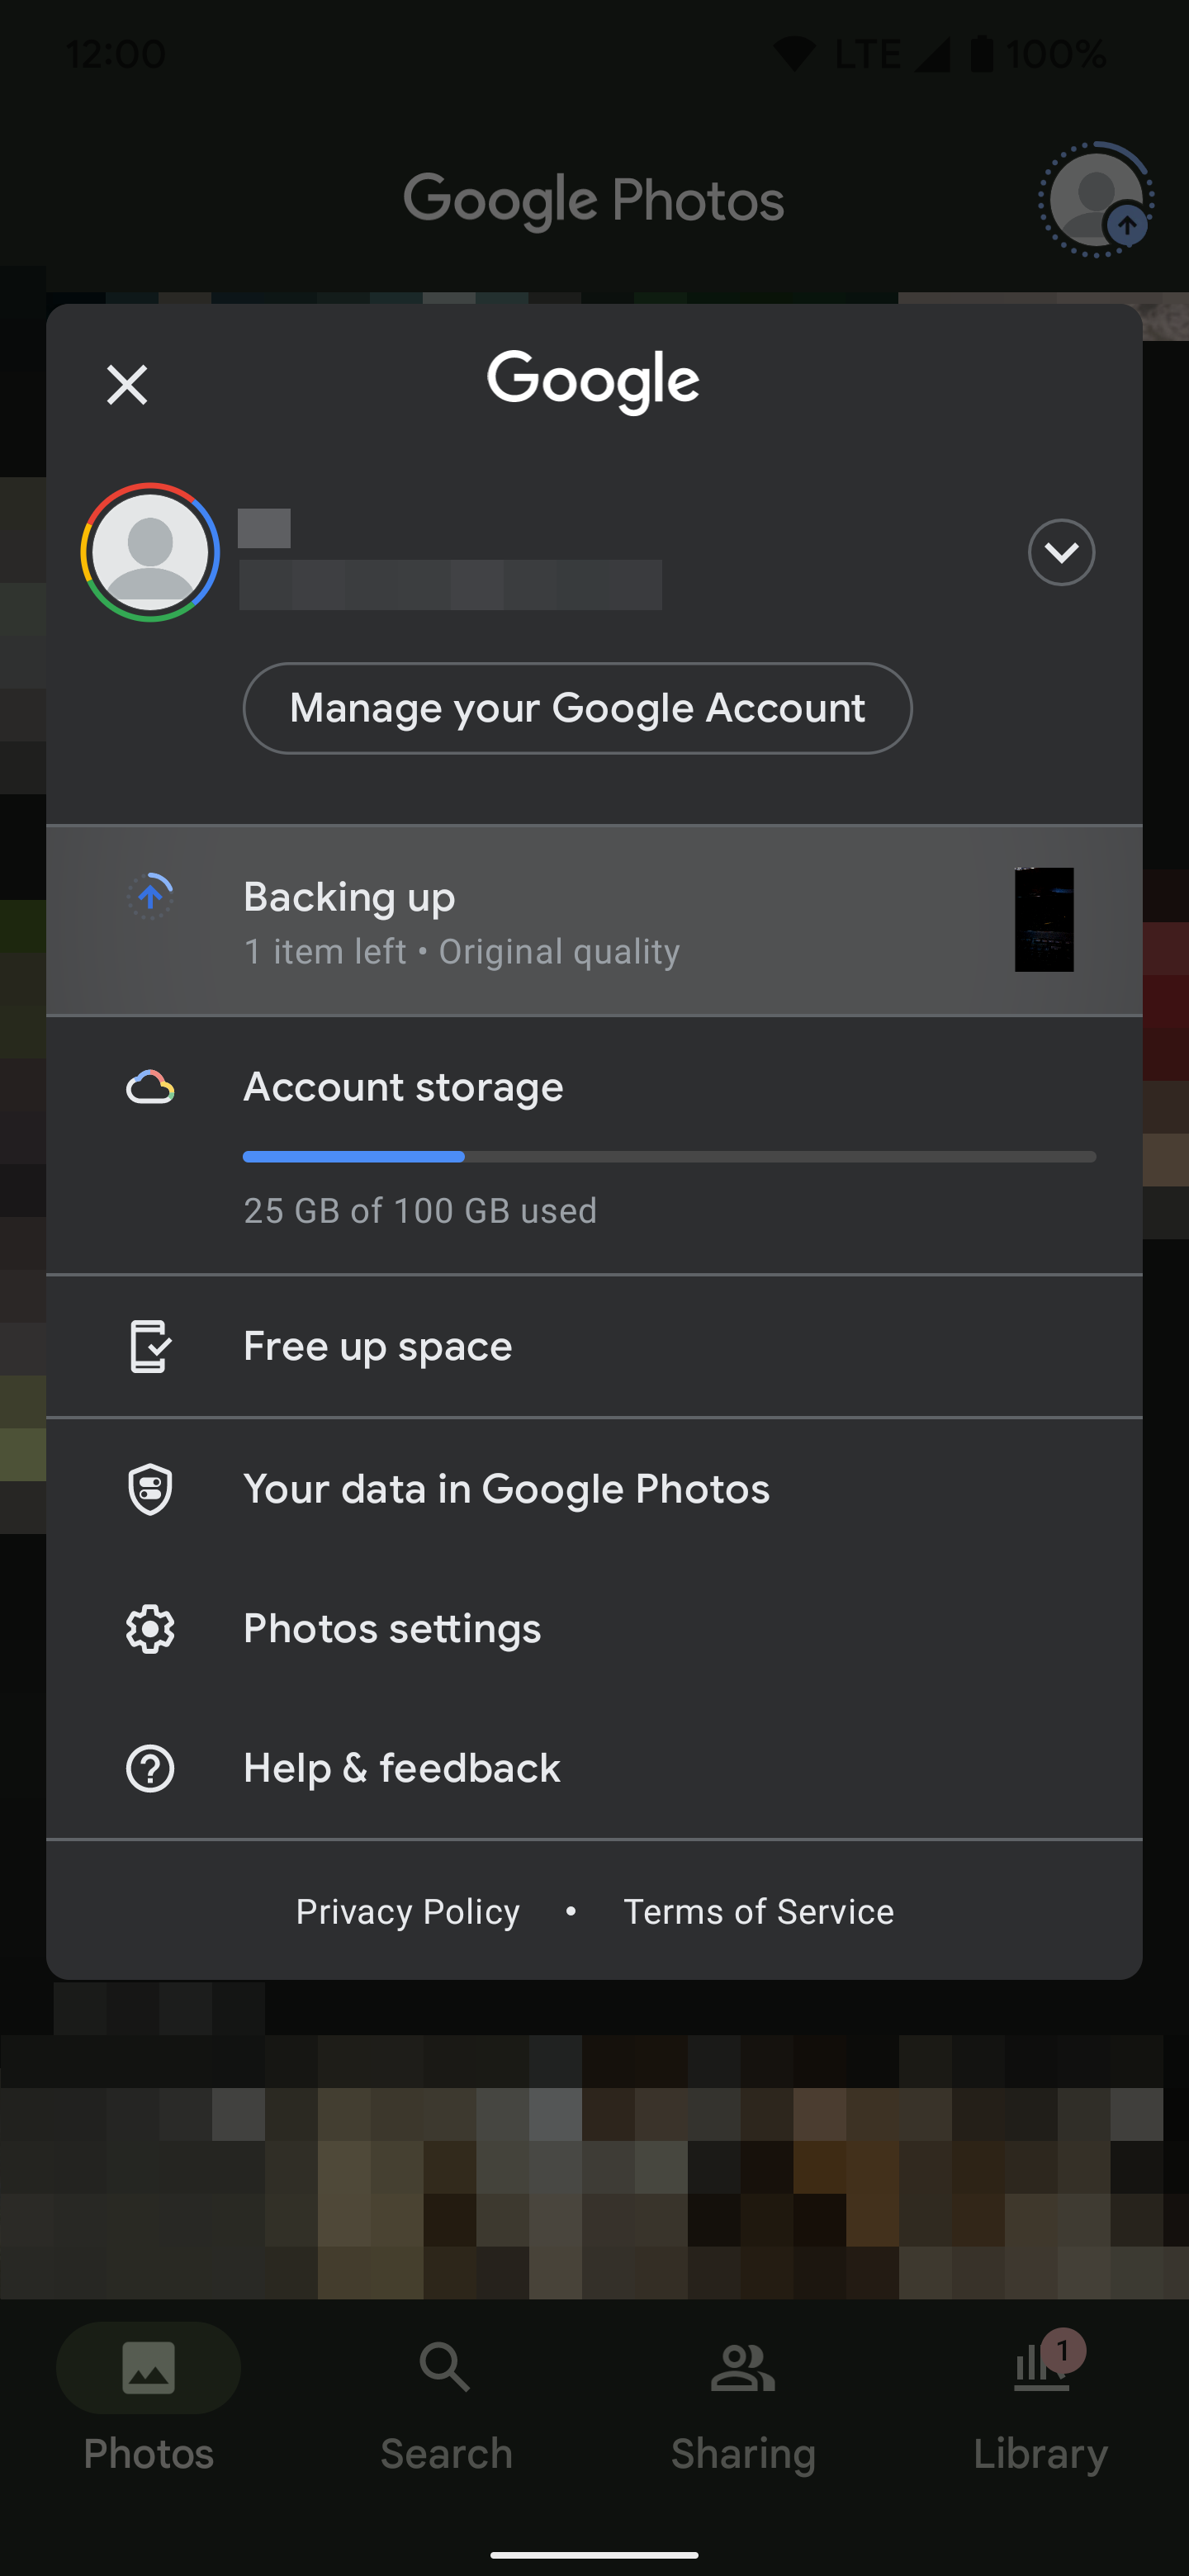 There is one item being backed up in the Google Photos app